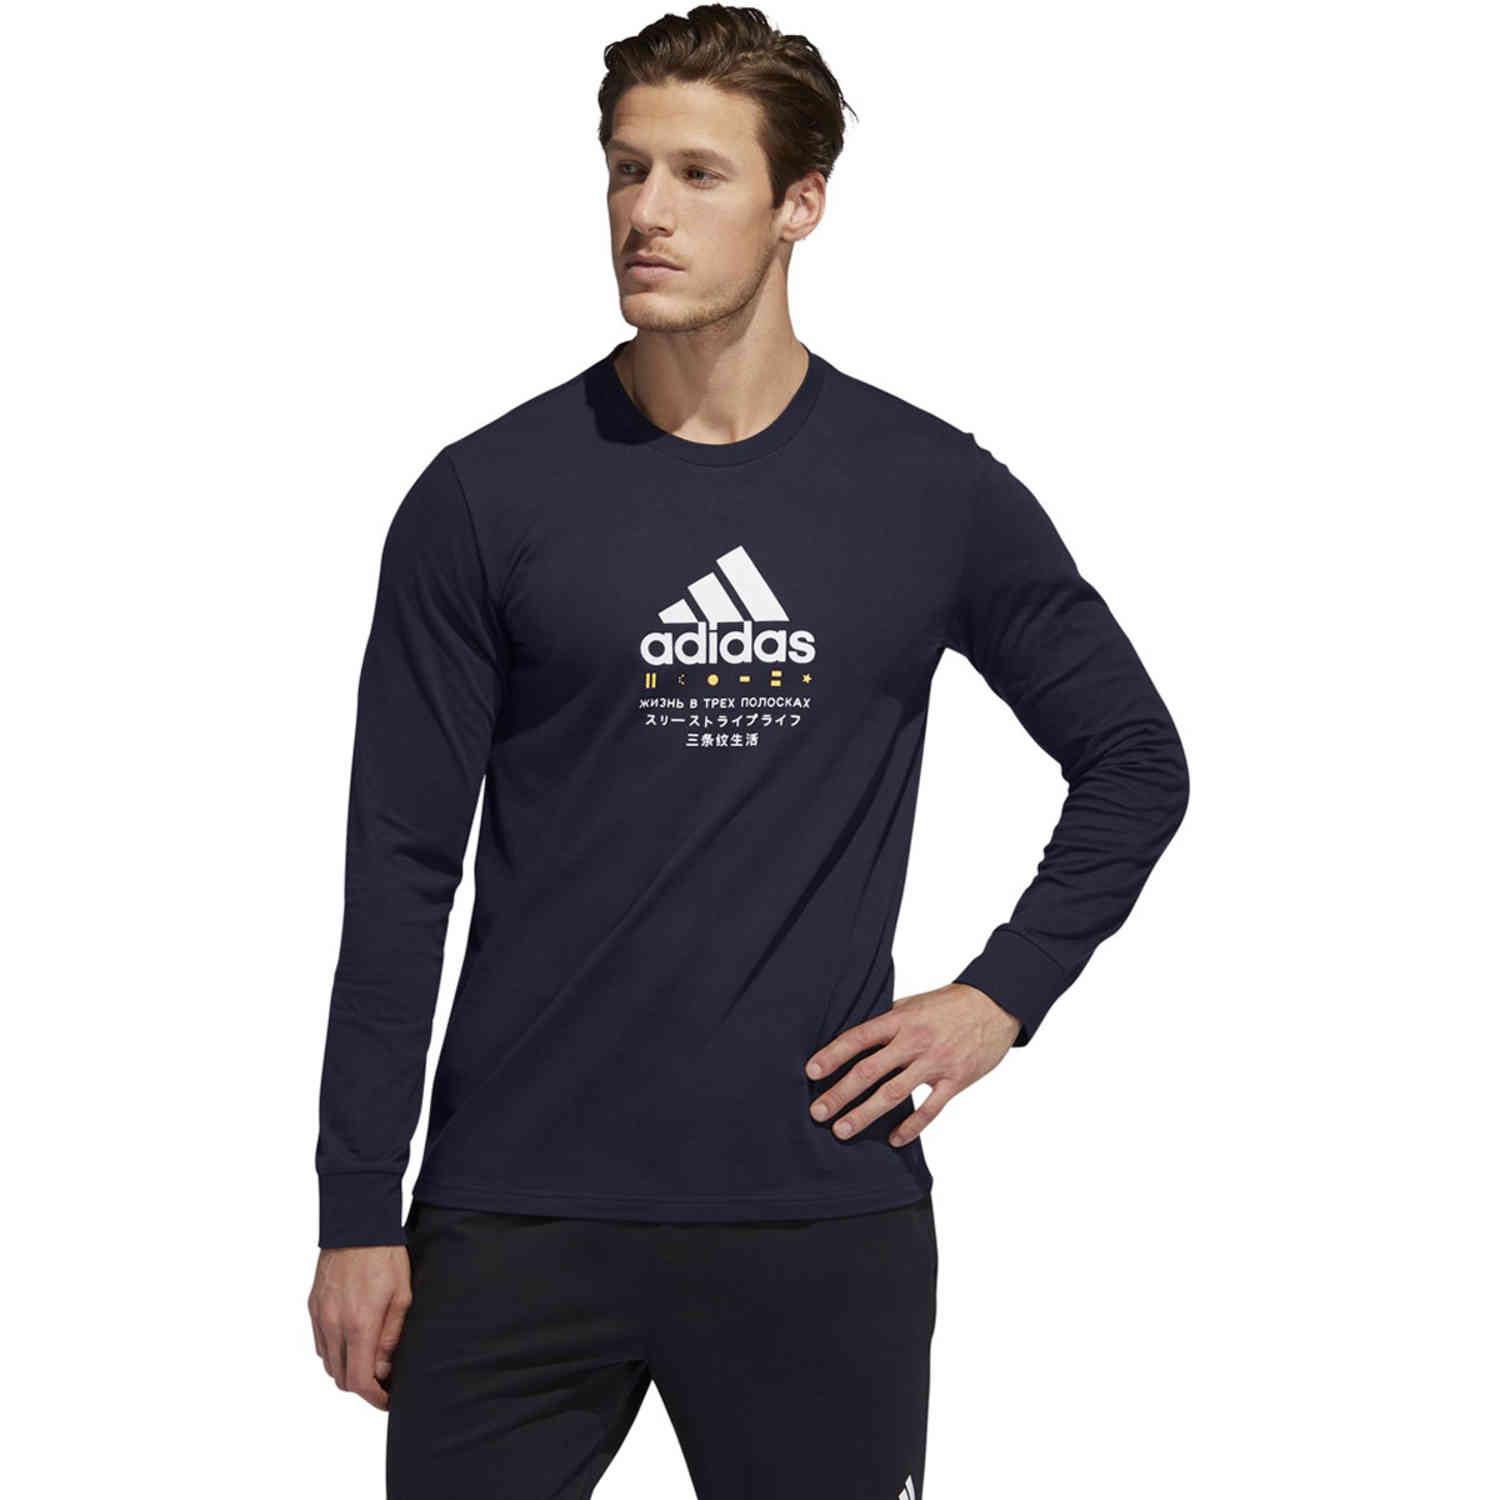 Soccer Legend L/S Master Citizens Graphic Ink Tee - adidas - Global